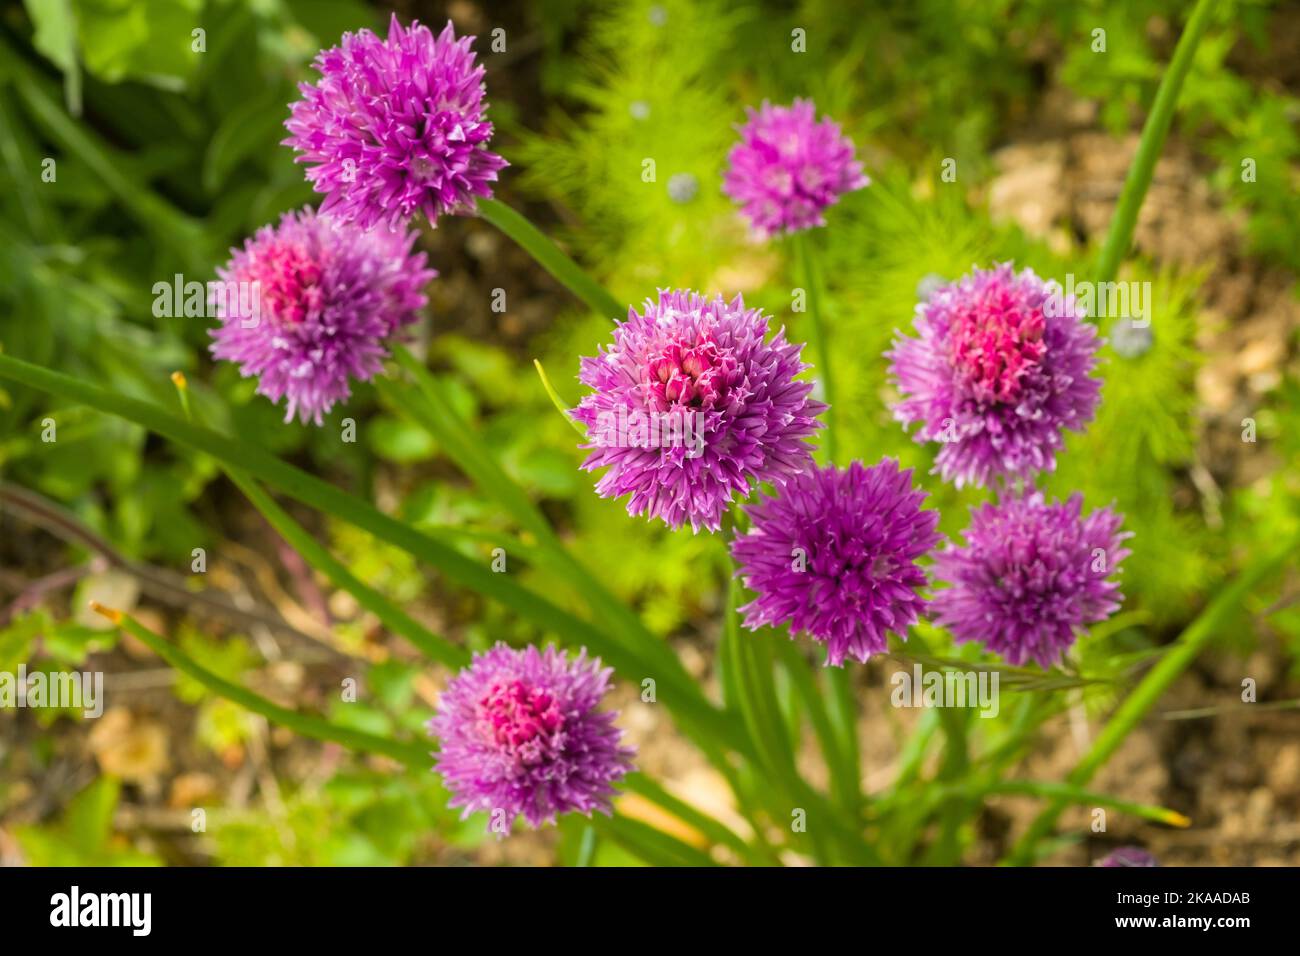 Chives, the colourful pink flowers of the Common Chive, Allium schoenoprasum in a cottage garden Stock Photo